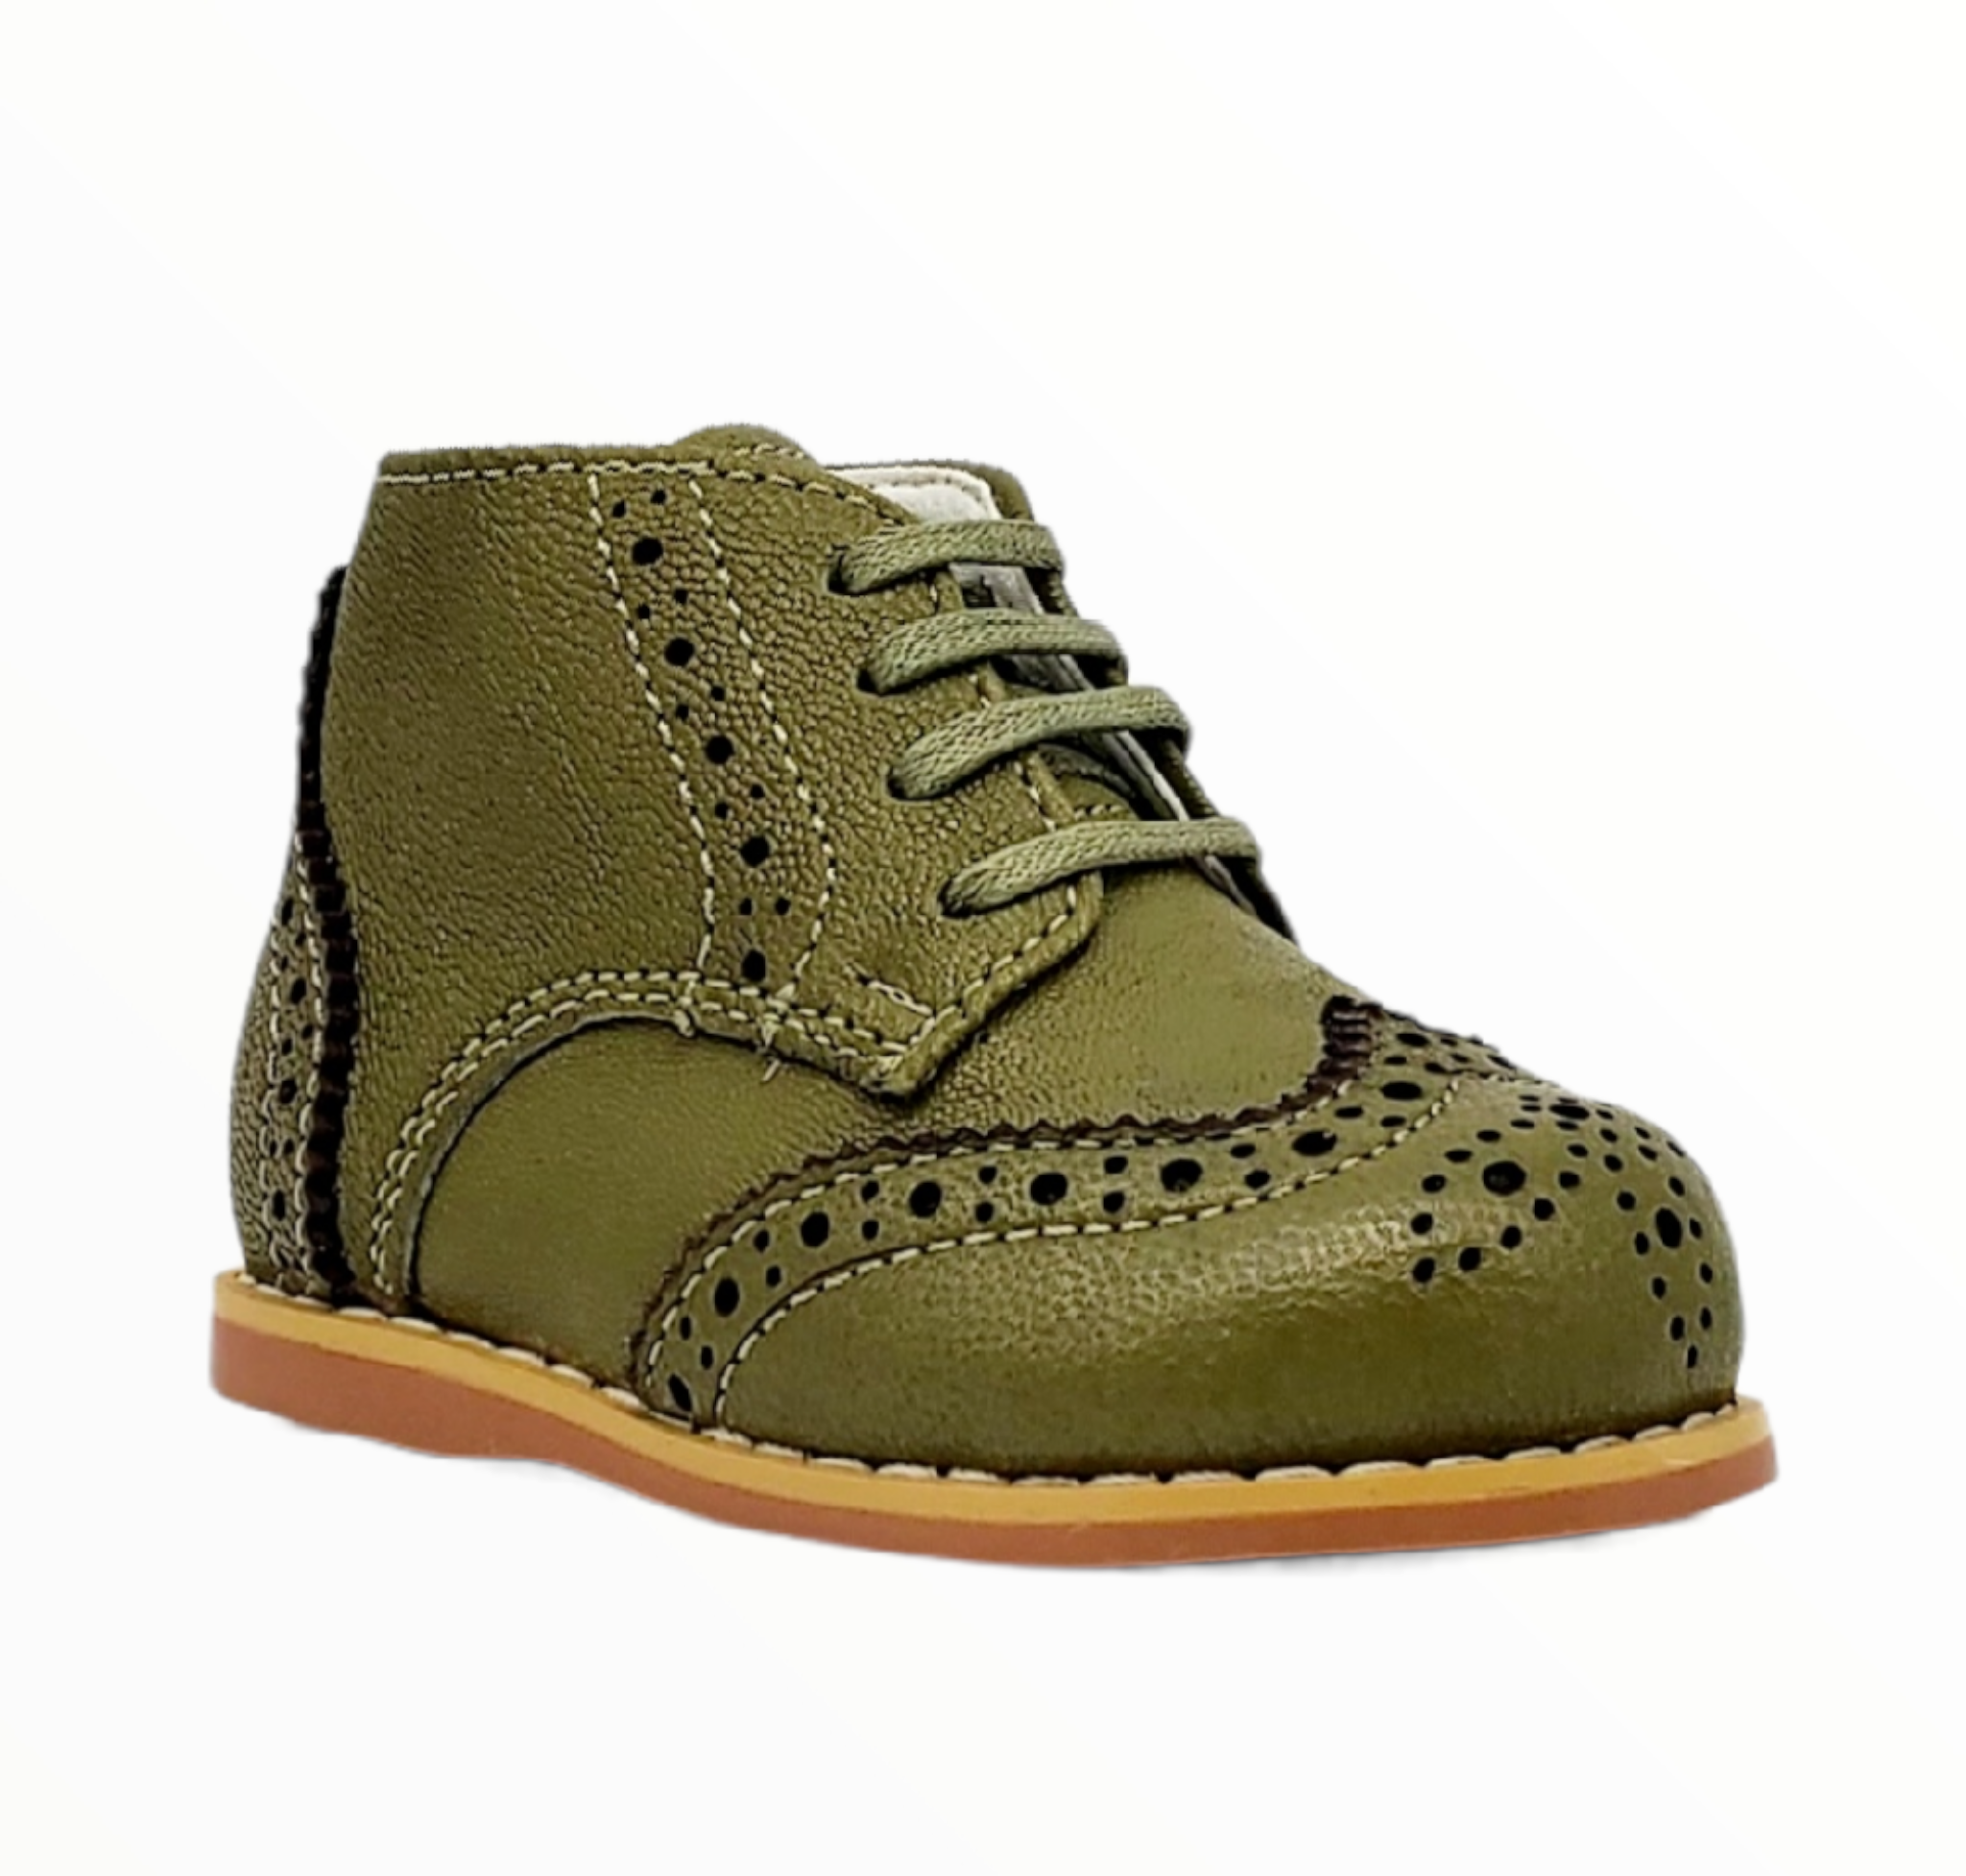 Classic Walkers Oxford - Olive - Tippy Tot Shoes